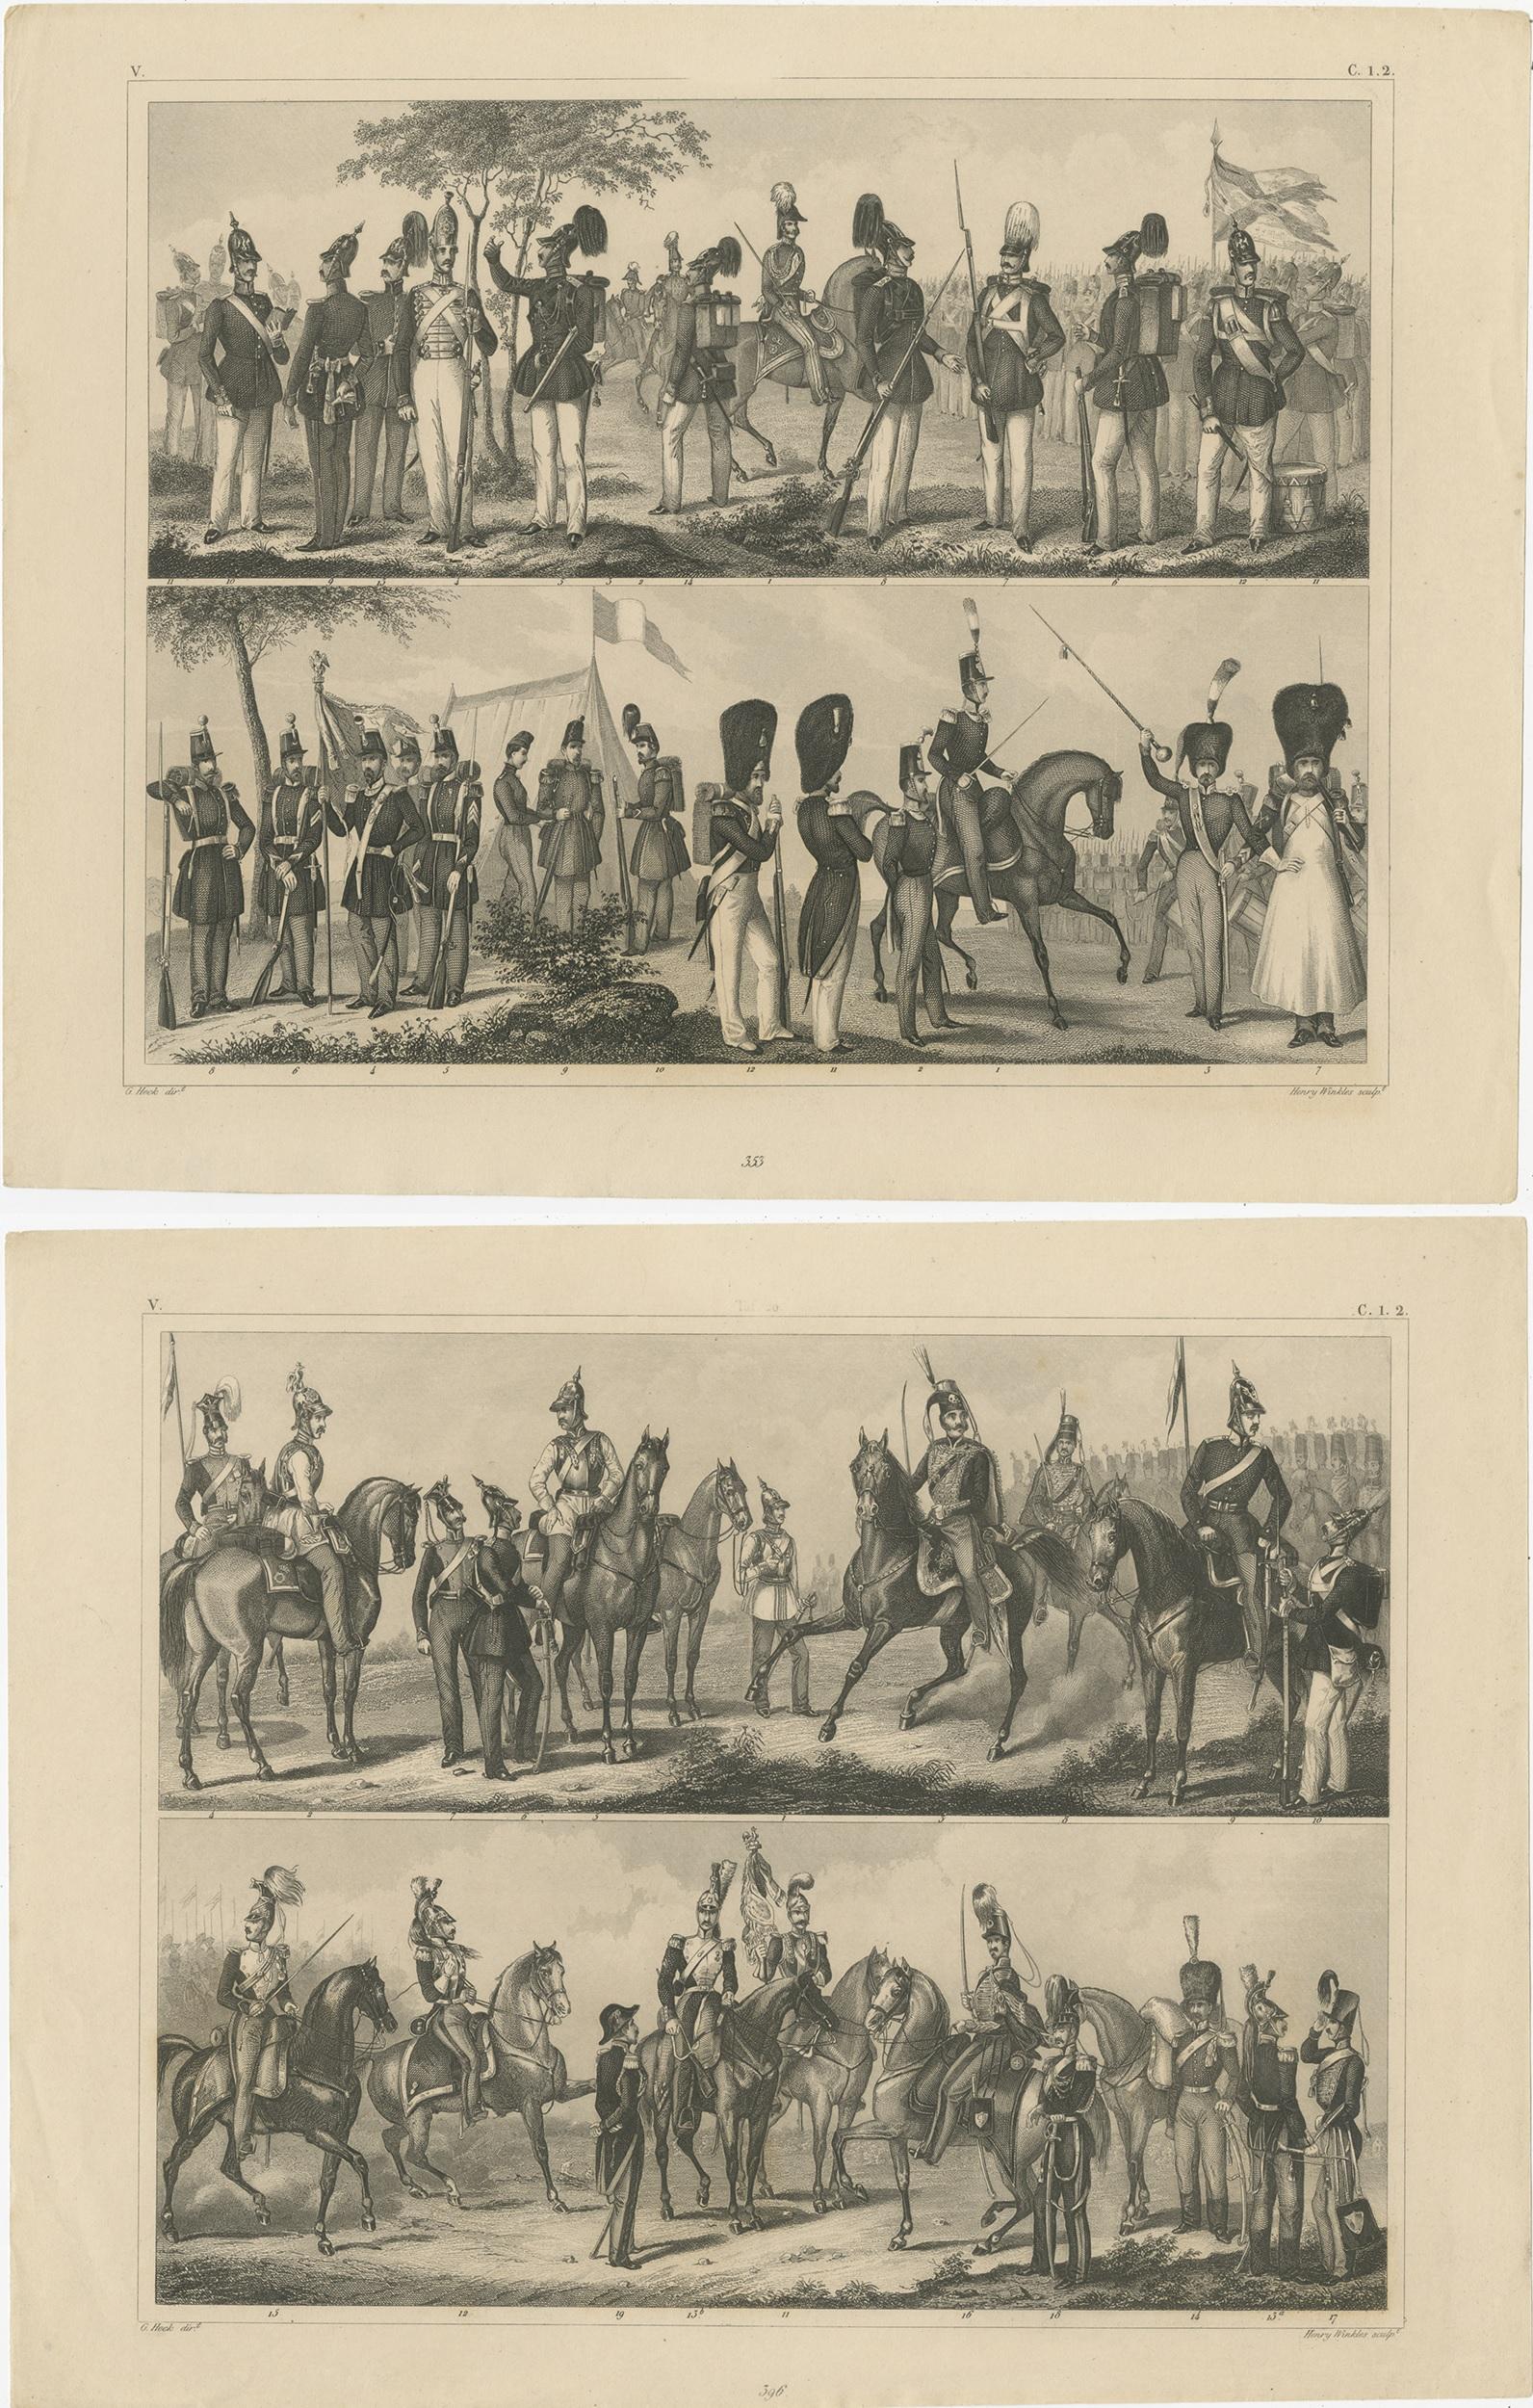 Set of two antique prints of various soldiers. These prints originate from volume 5 of 'Bilder-Atlas zum Conversations-Lexikon' by Johann George Heck. Published 1849.